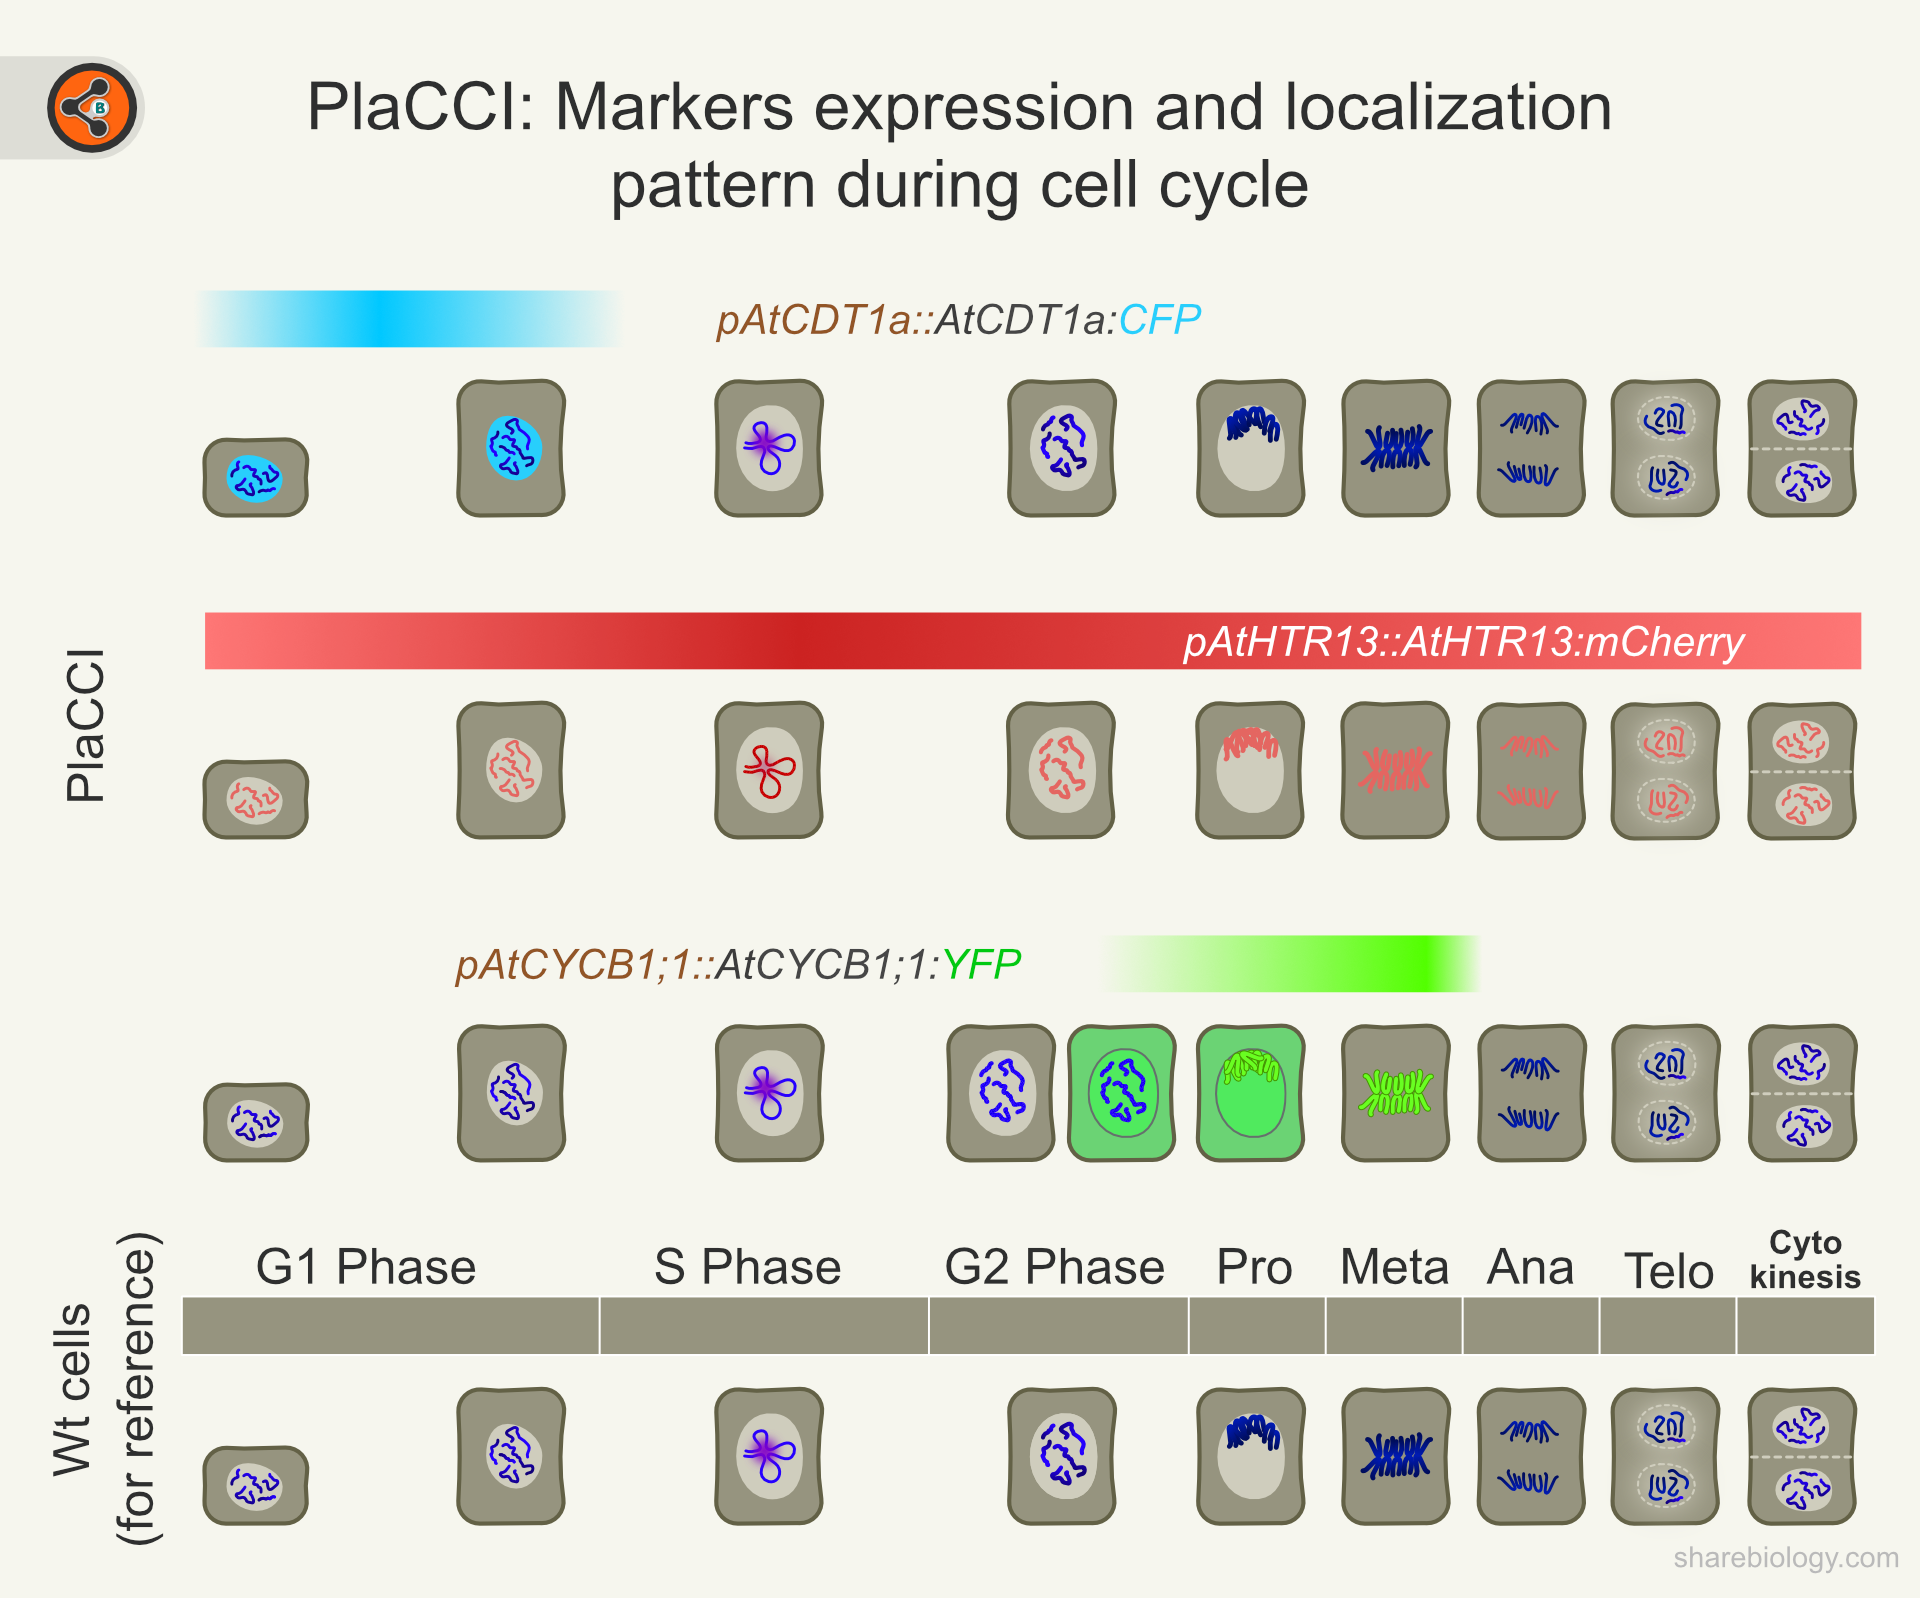 Illustration showing PlaCCI (plant cell cycle indicator) markers expression and localization during cell cycle.